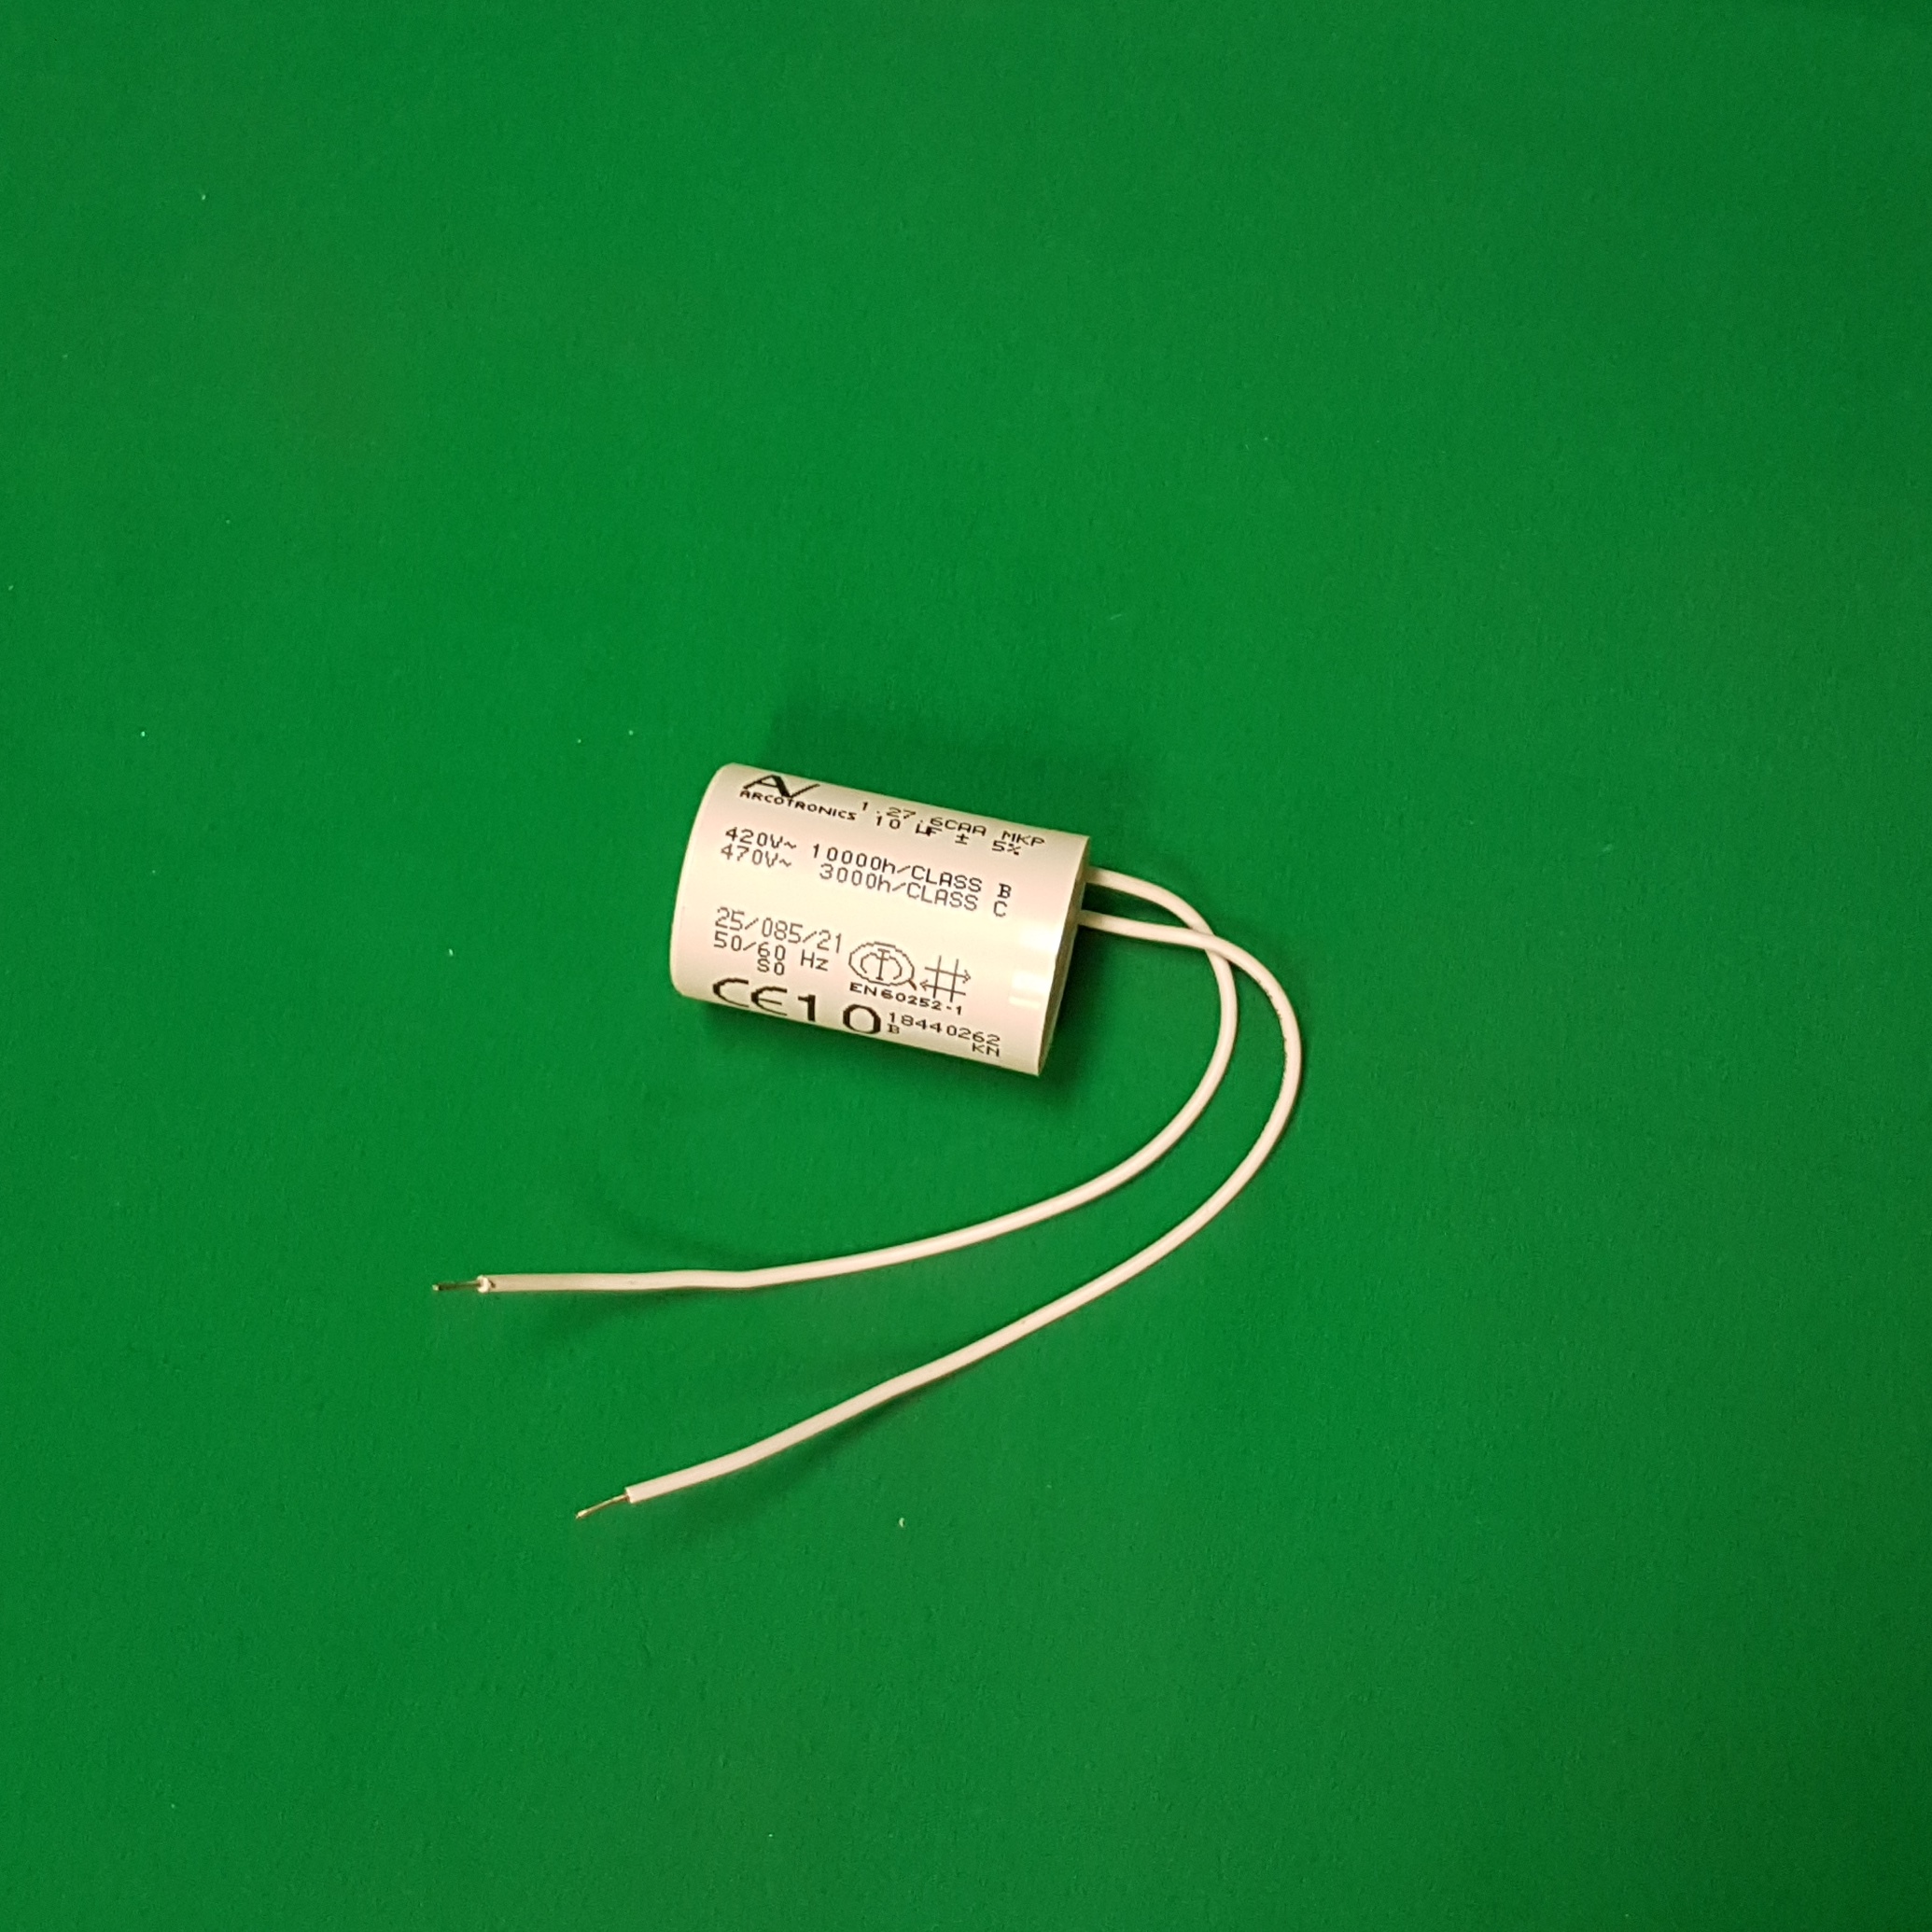 CAME 10uF Gate Motor Capacitor